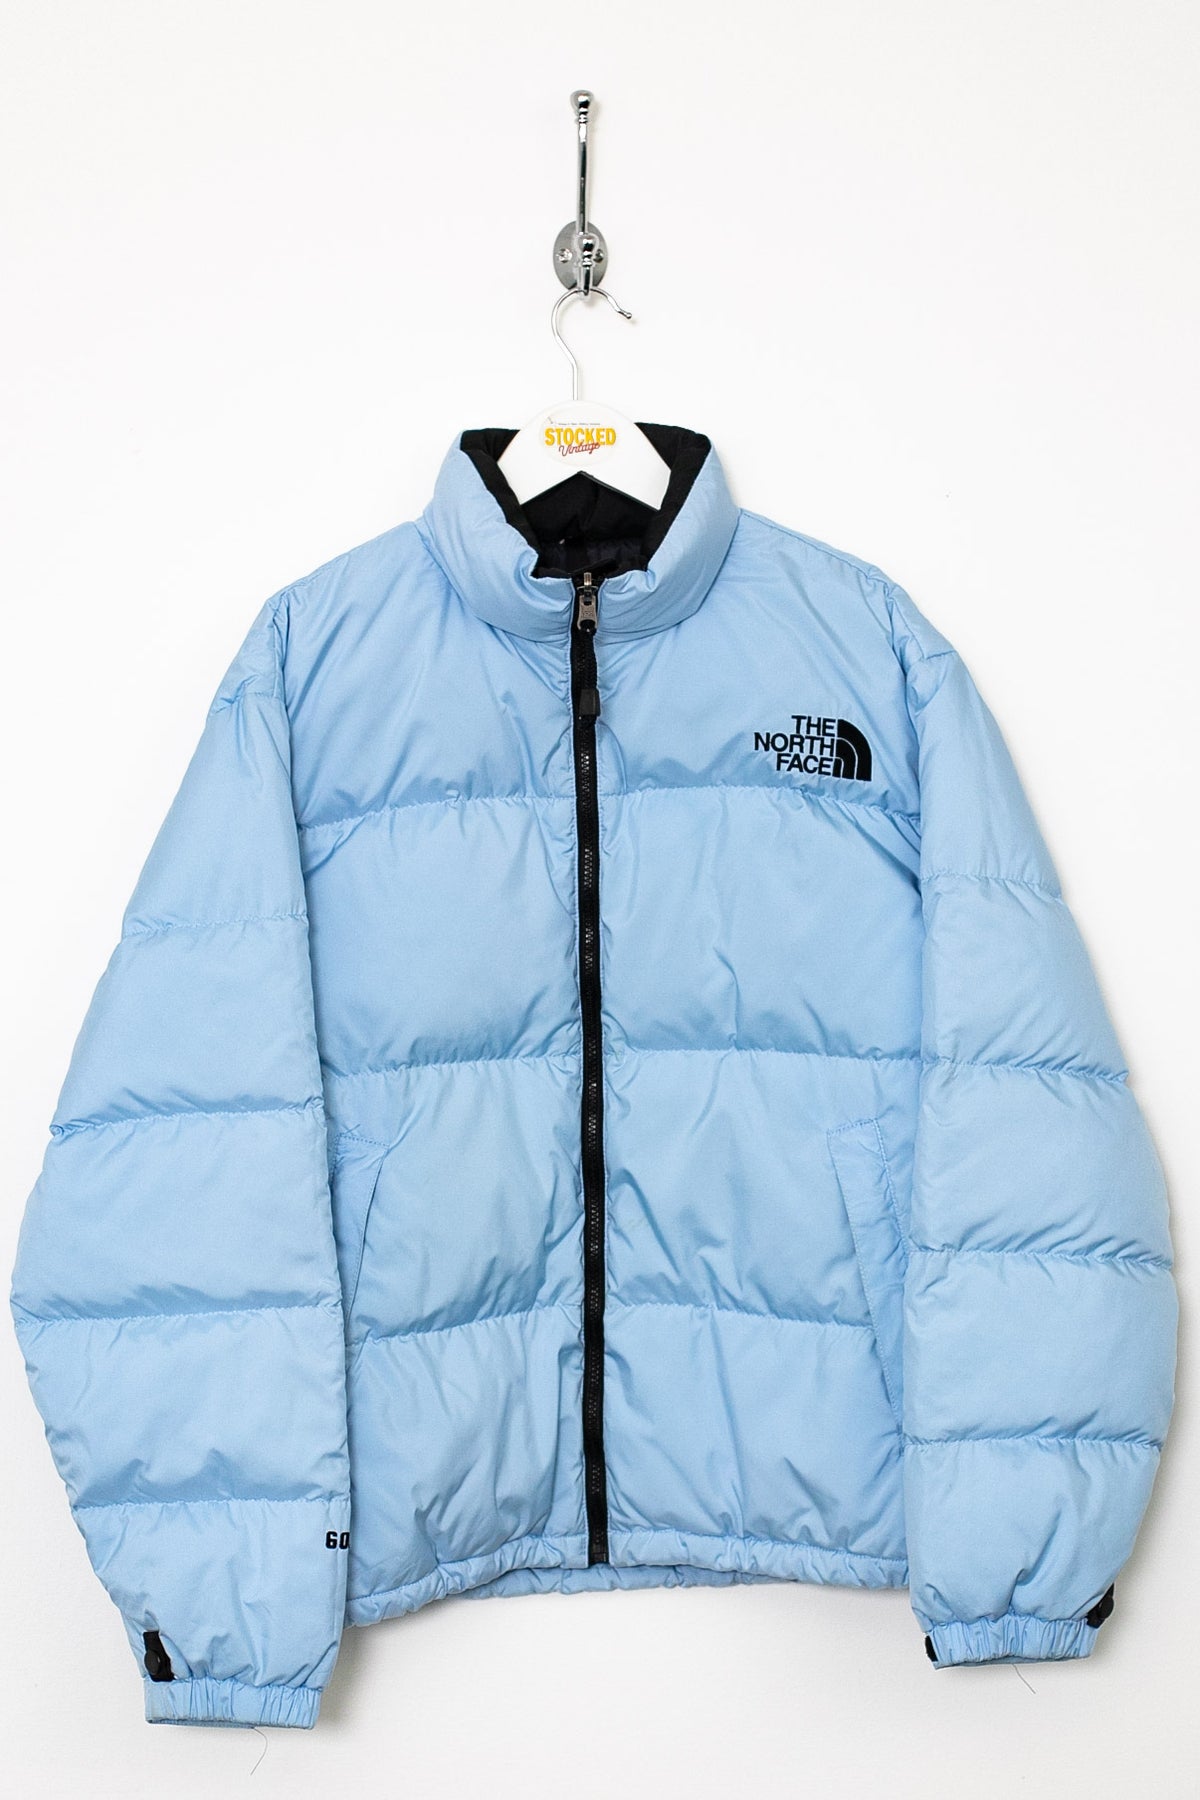 The North Face 600 Fill Puffer Jacket (M)